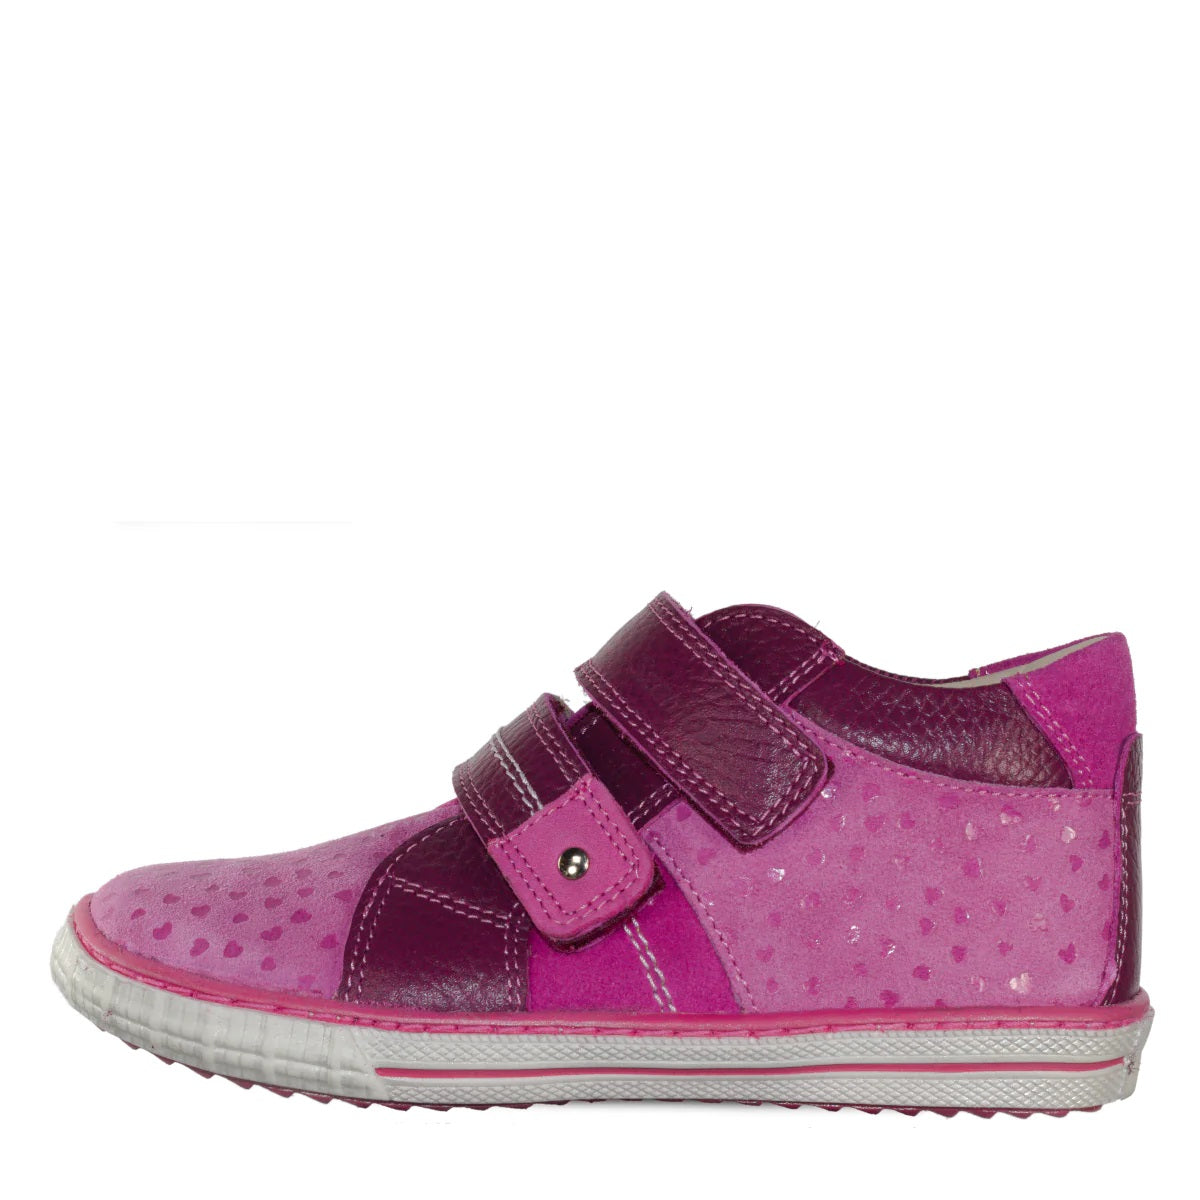 Szamos kid girl sneakers pink with hearts and burgundy velcro straps toddler/little kid/big kid size